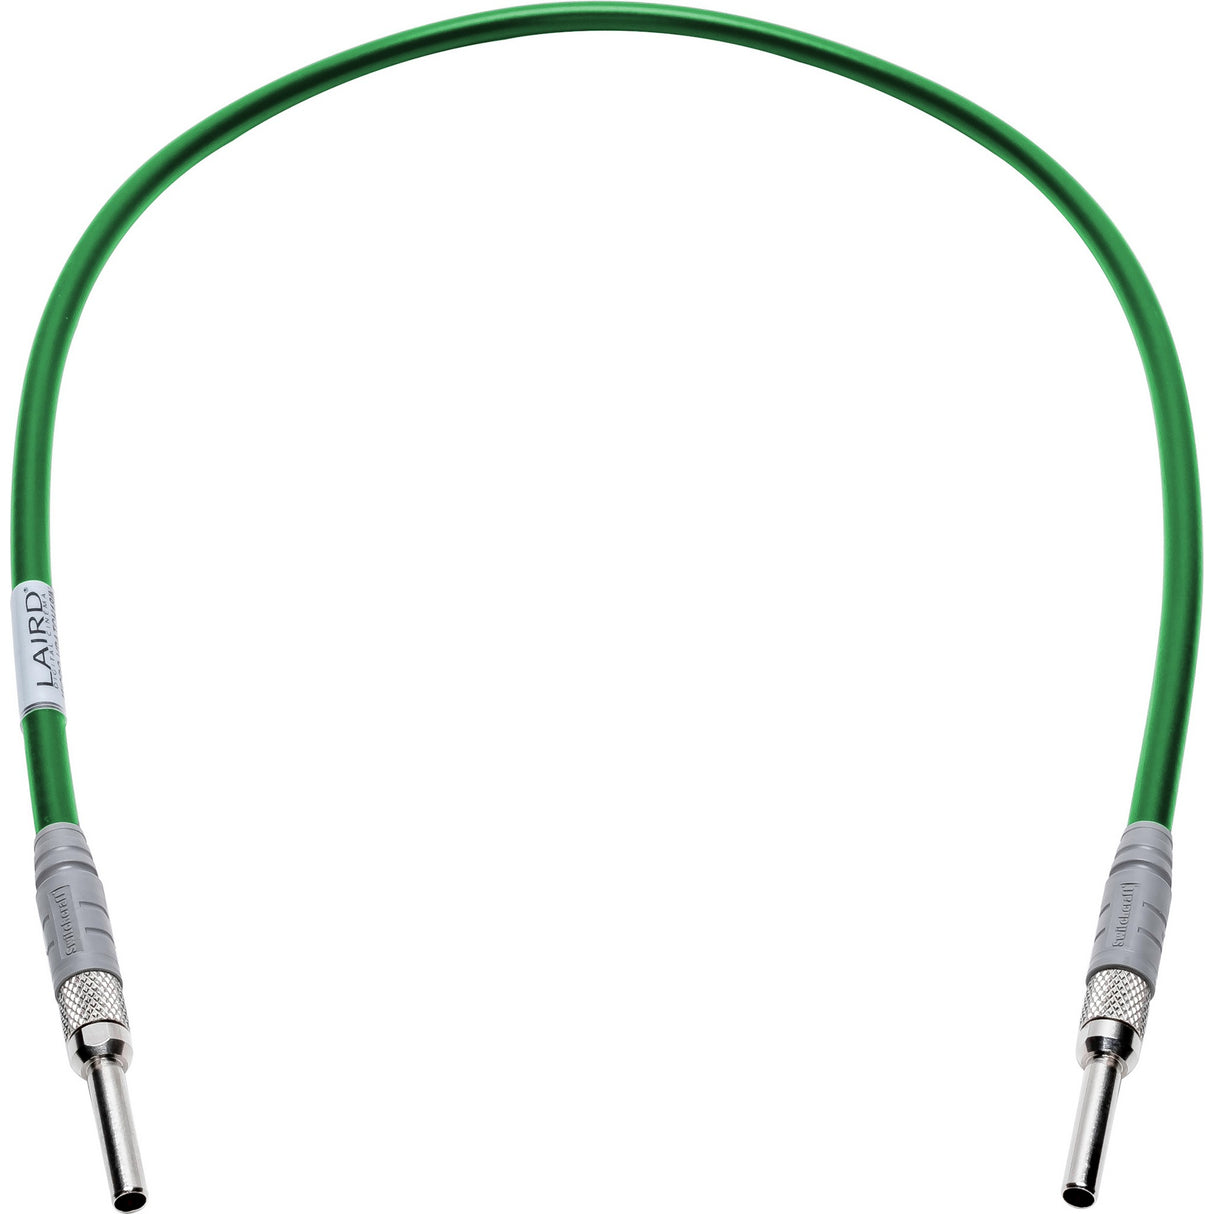 Laird MICRO-VPATCH-18IGN 12G-SDI Micro Video Patch Cable, Military Green, 18-Inch